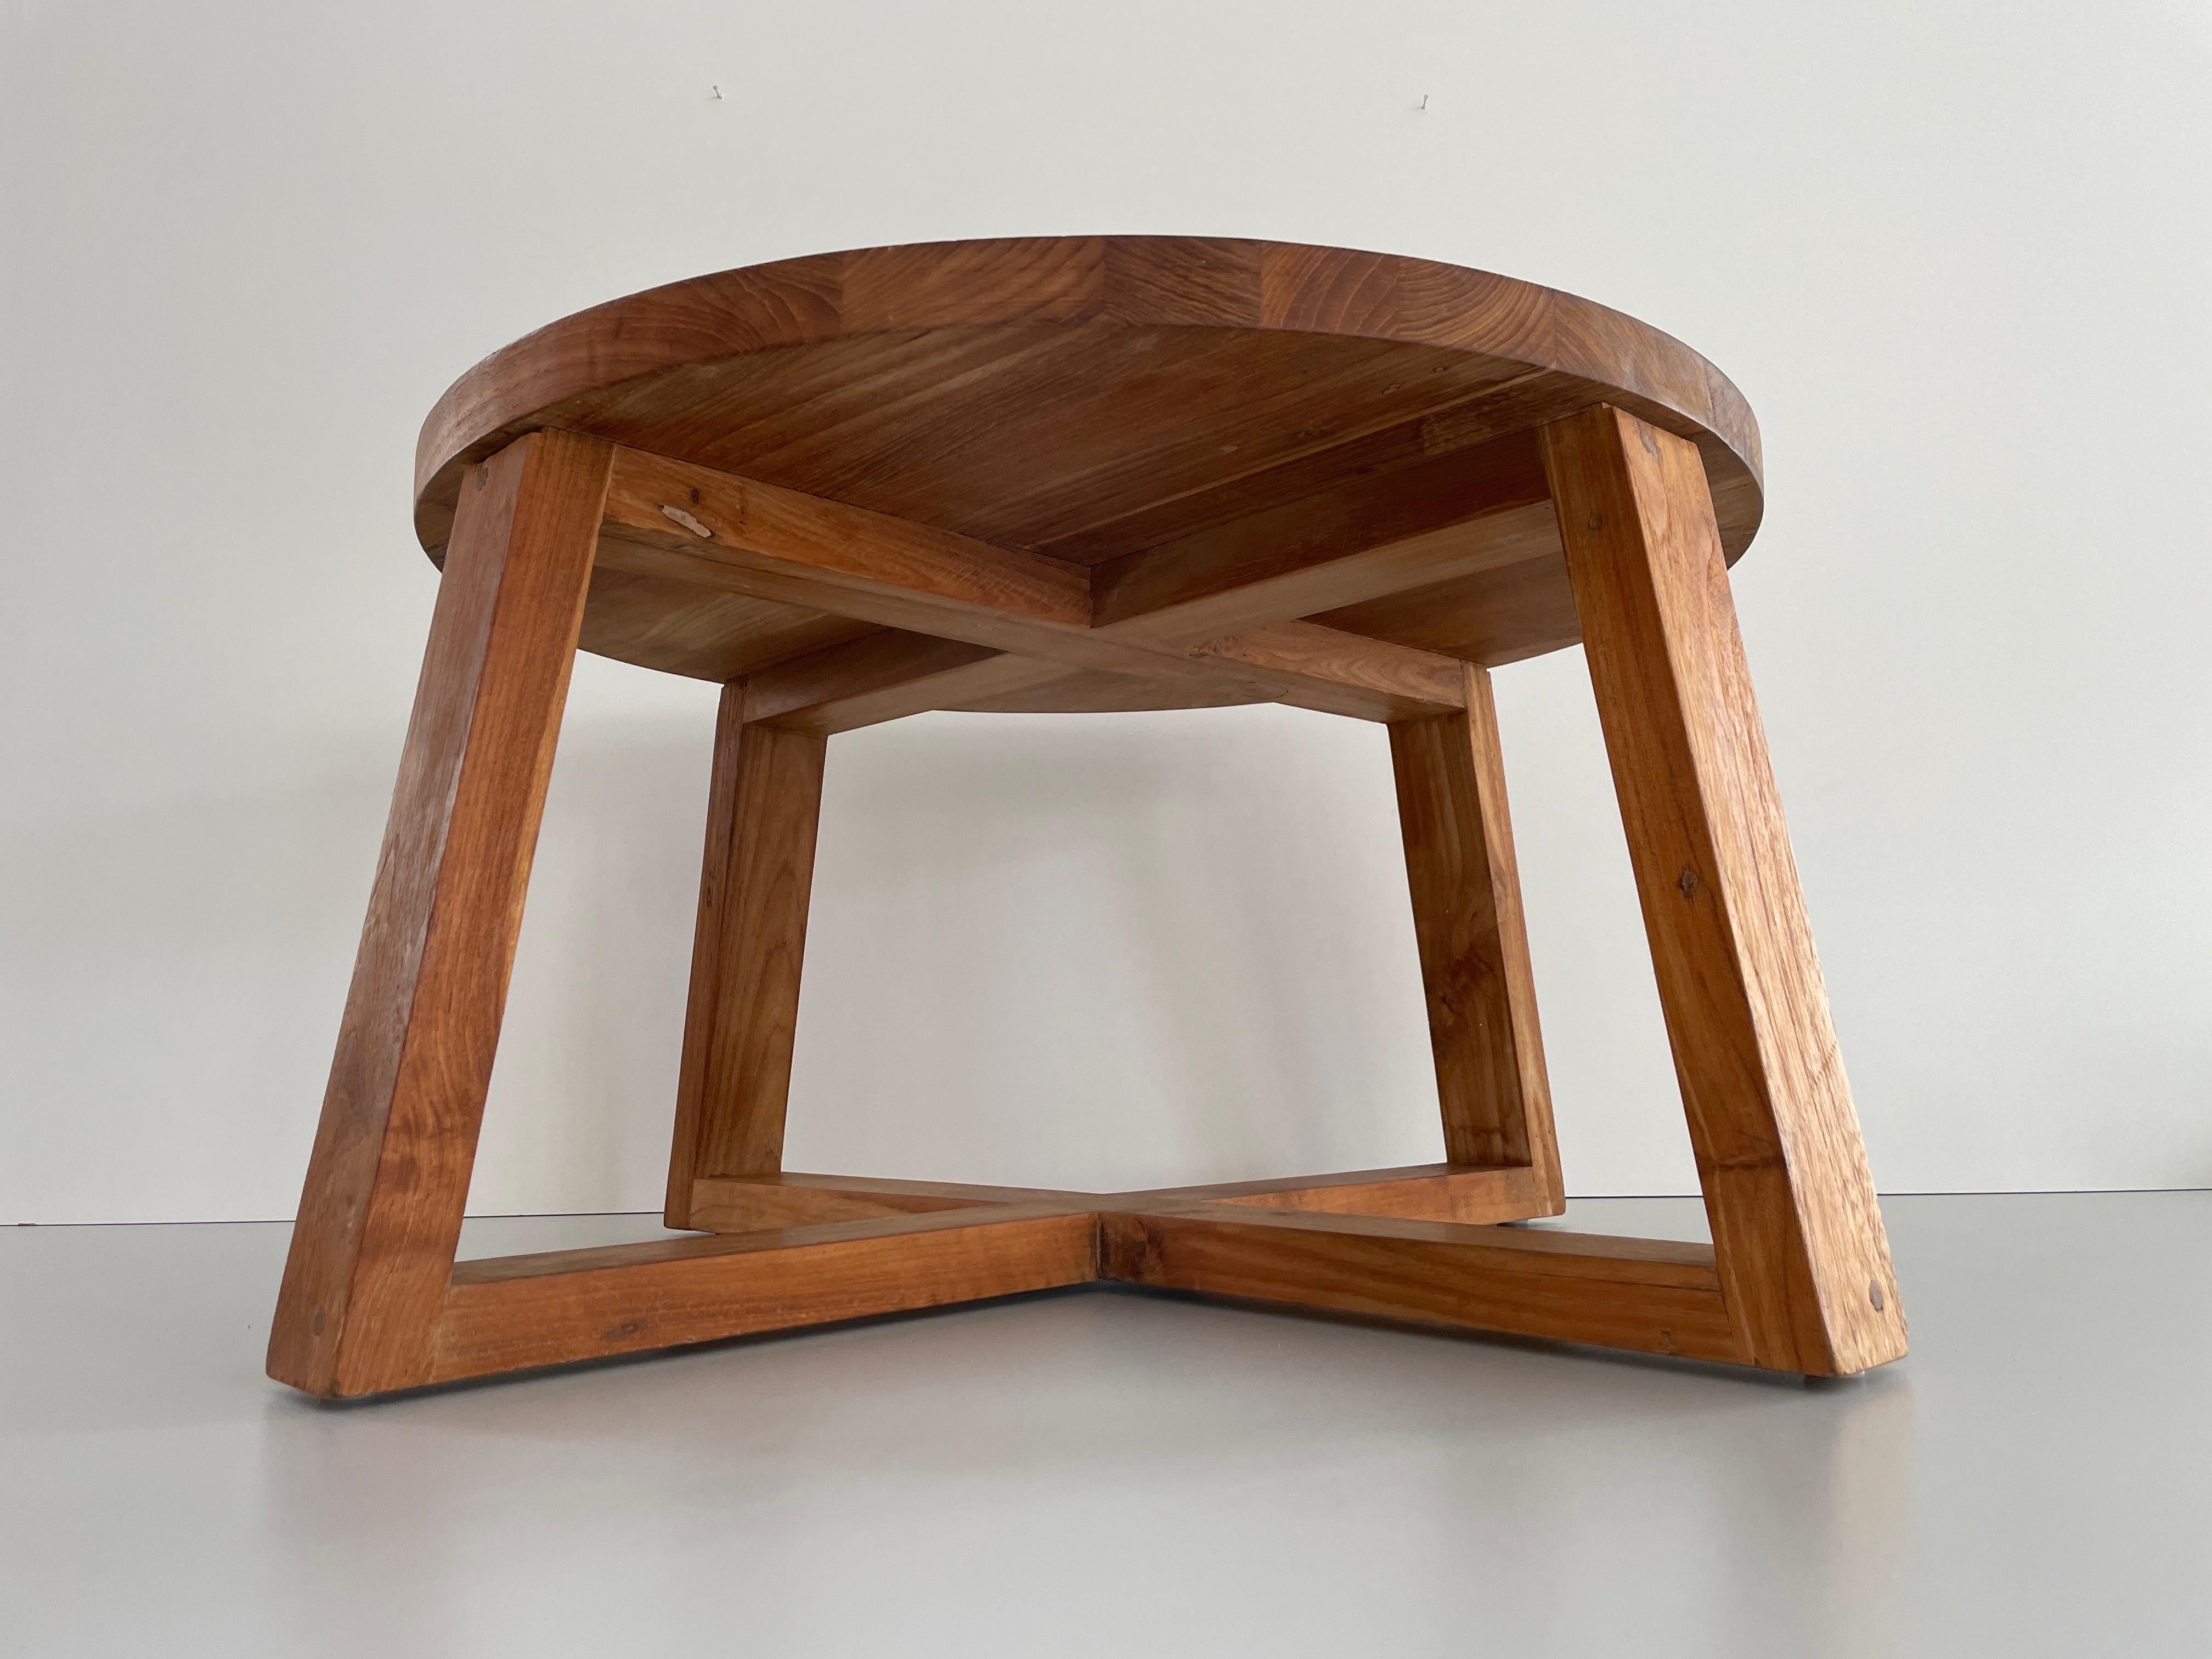 Minimalist Design Round Thick Wood Living Room Table, 1960s, Denmark 2